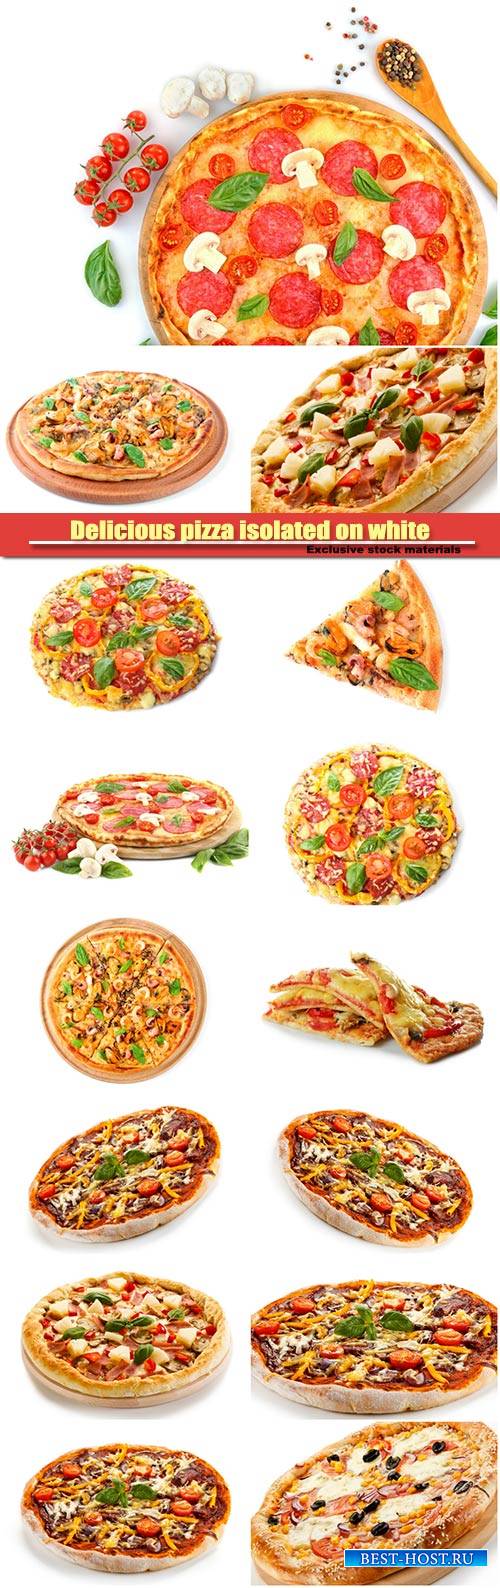 Delicious pizza isolated on white background